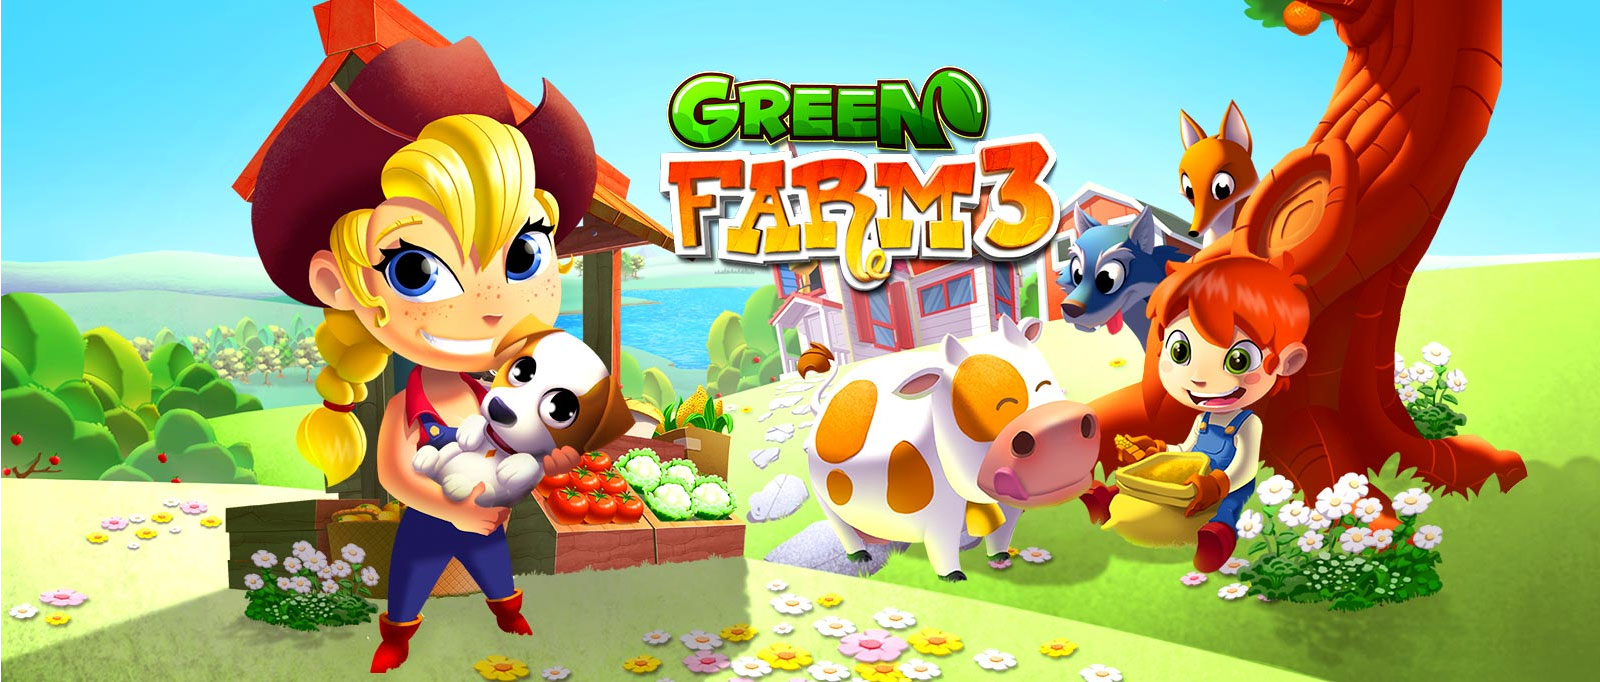 Download Green Farm 3 Mod Apk 4.1.3 (Unlimited Money) For Android